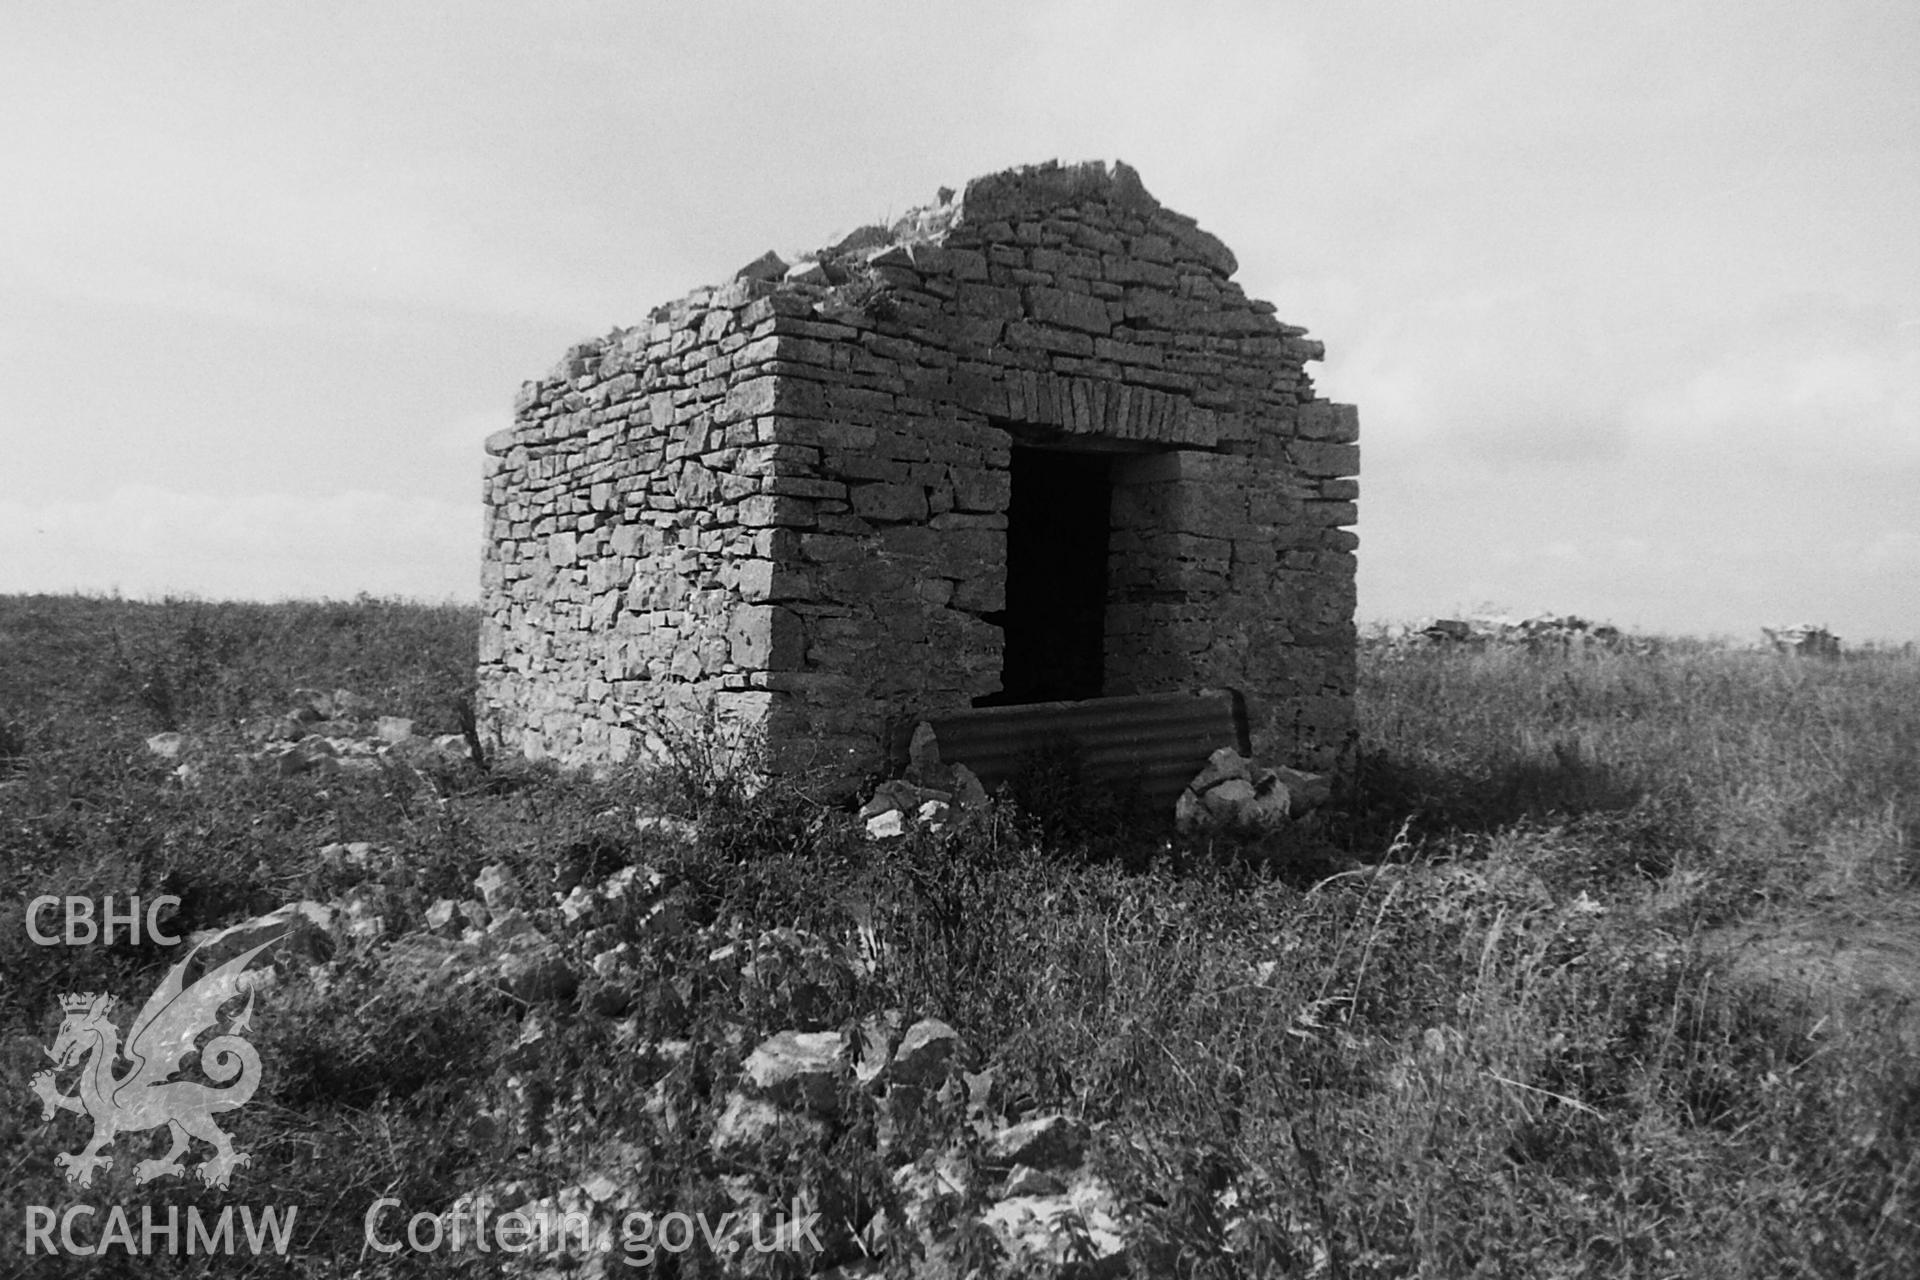 Black and white photo showing ruins on St Margaret's Isle, taken by Paul R. Davis, 1984.